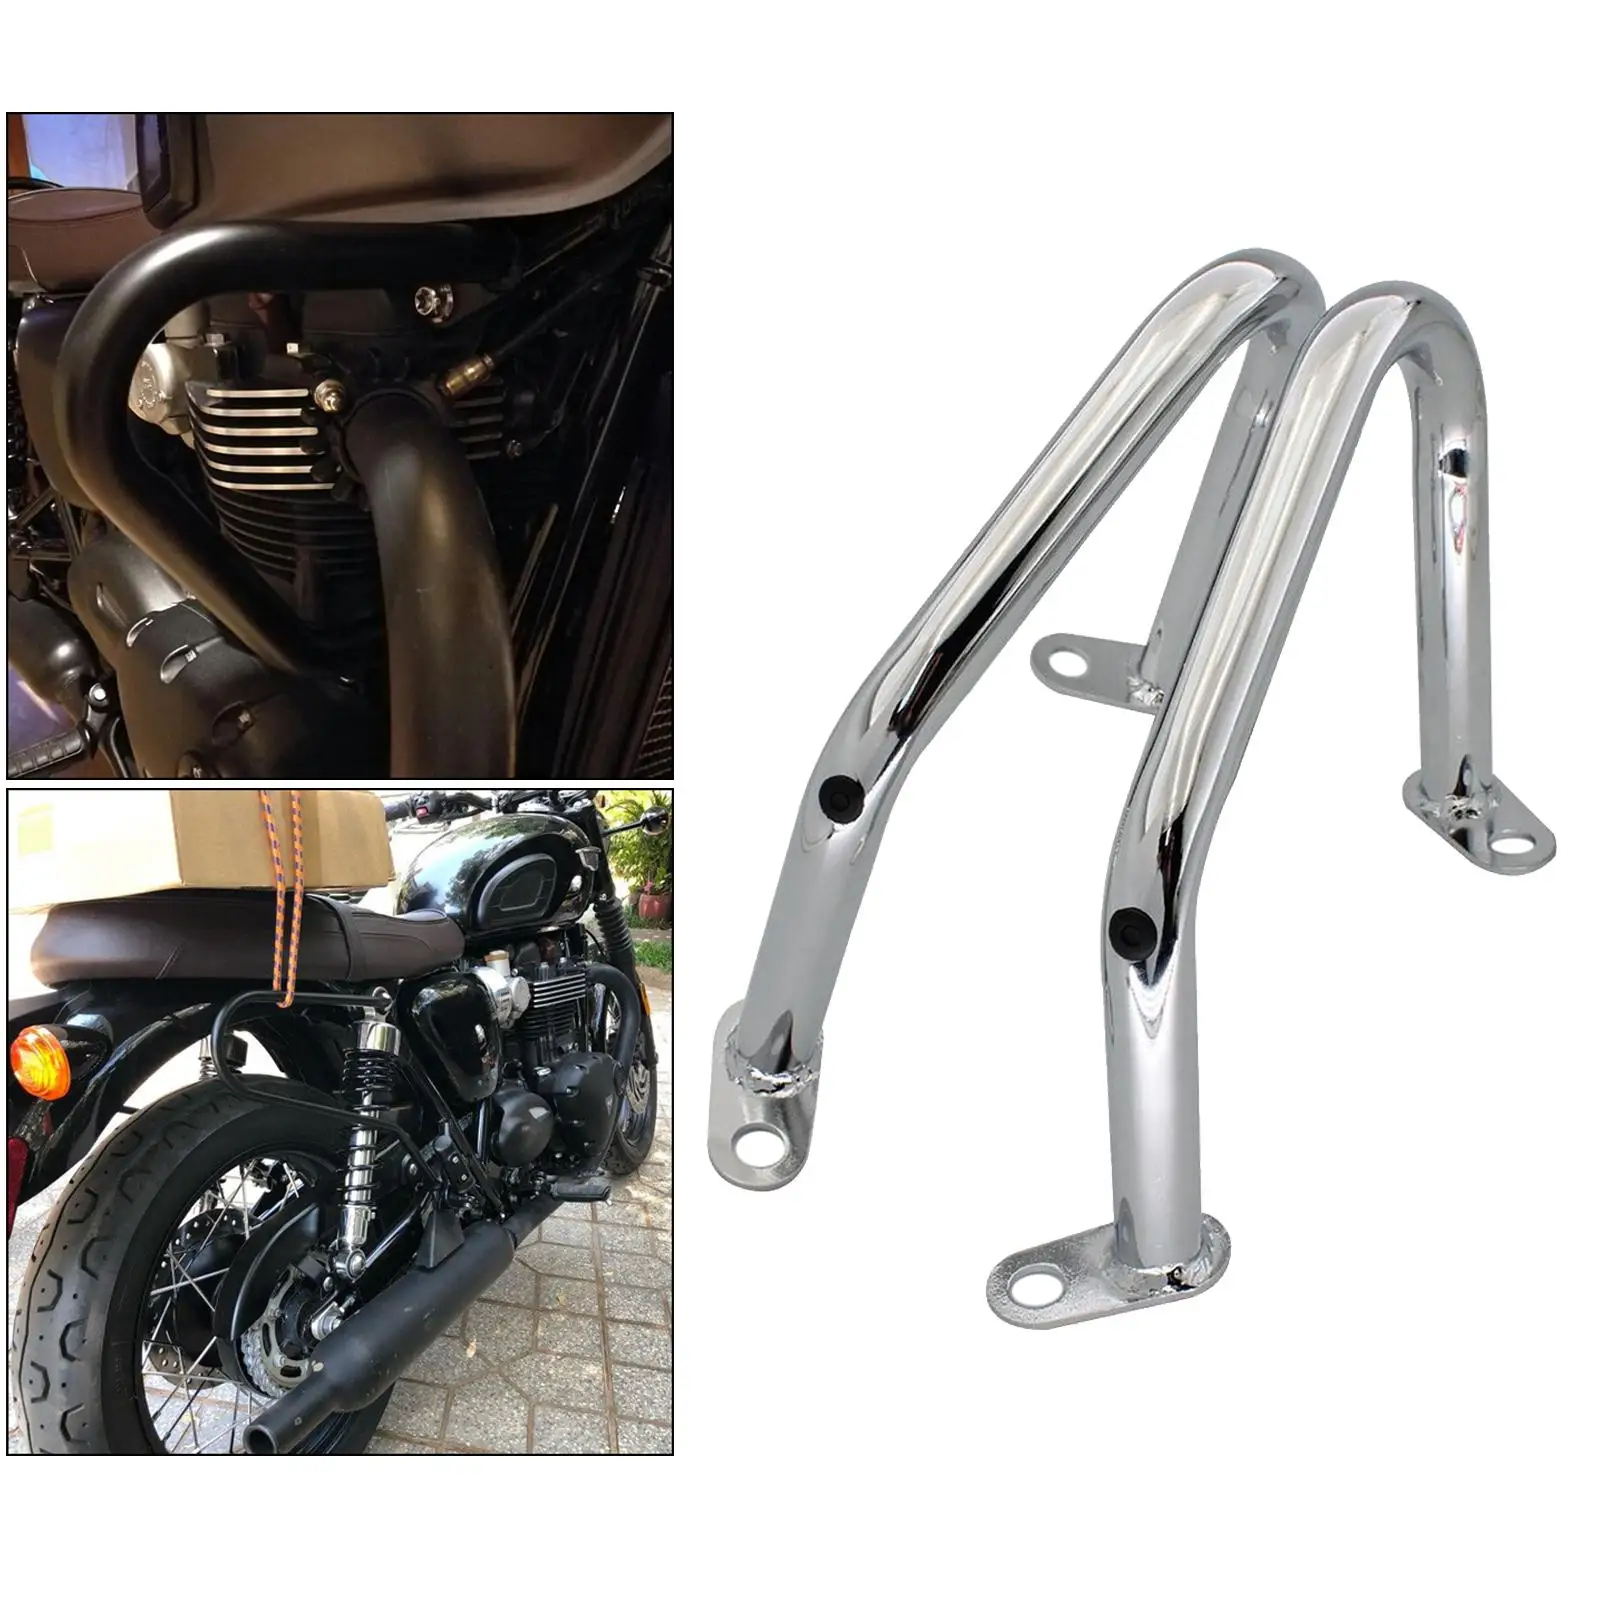 2x Motorcycle Engine Guard  Vehicle Accessories for   Bobber 2017-2019